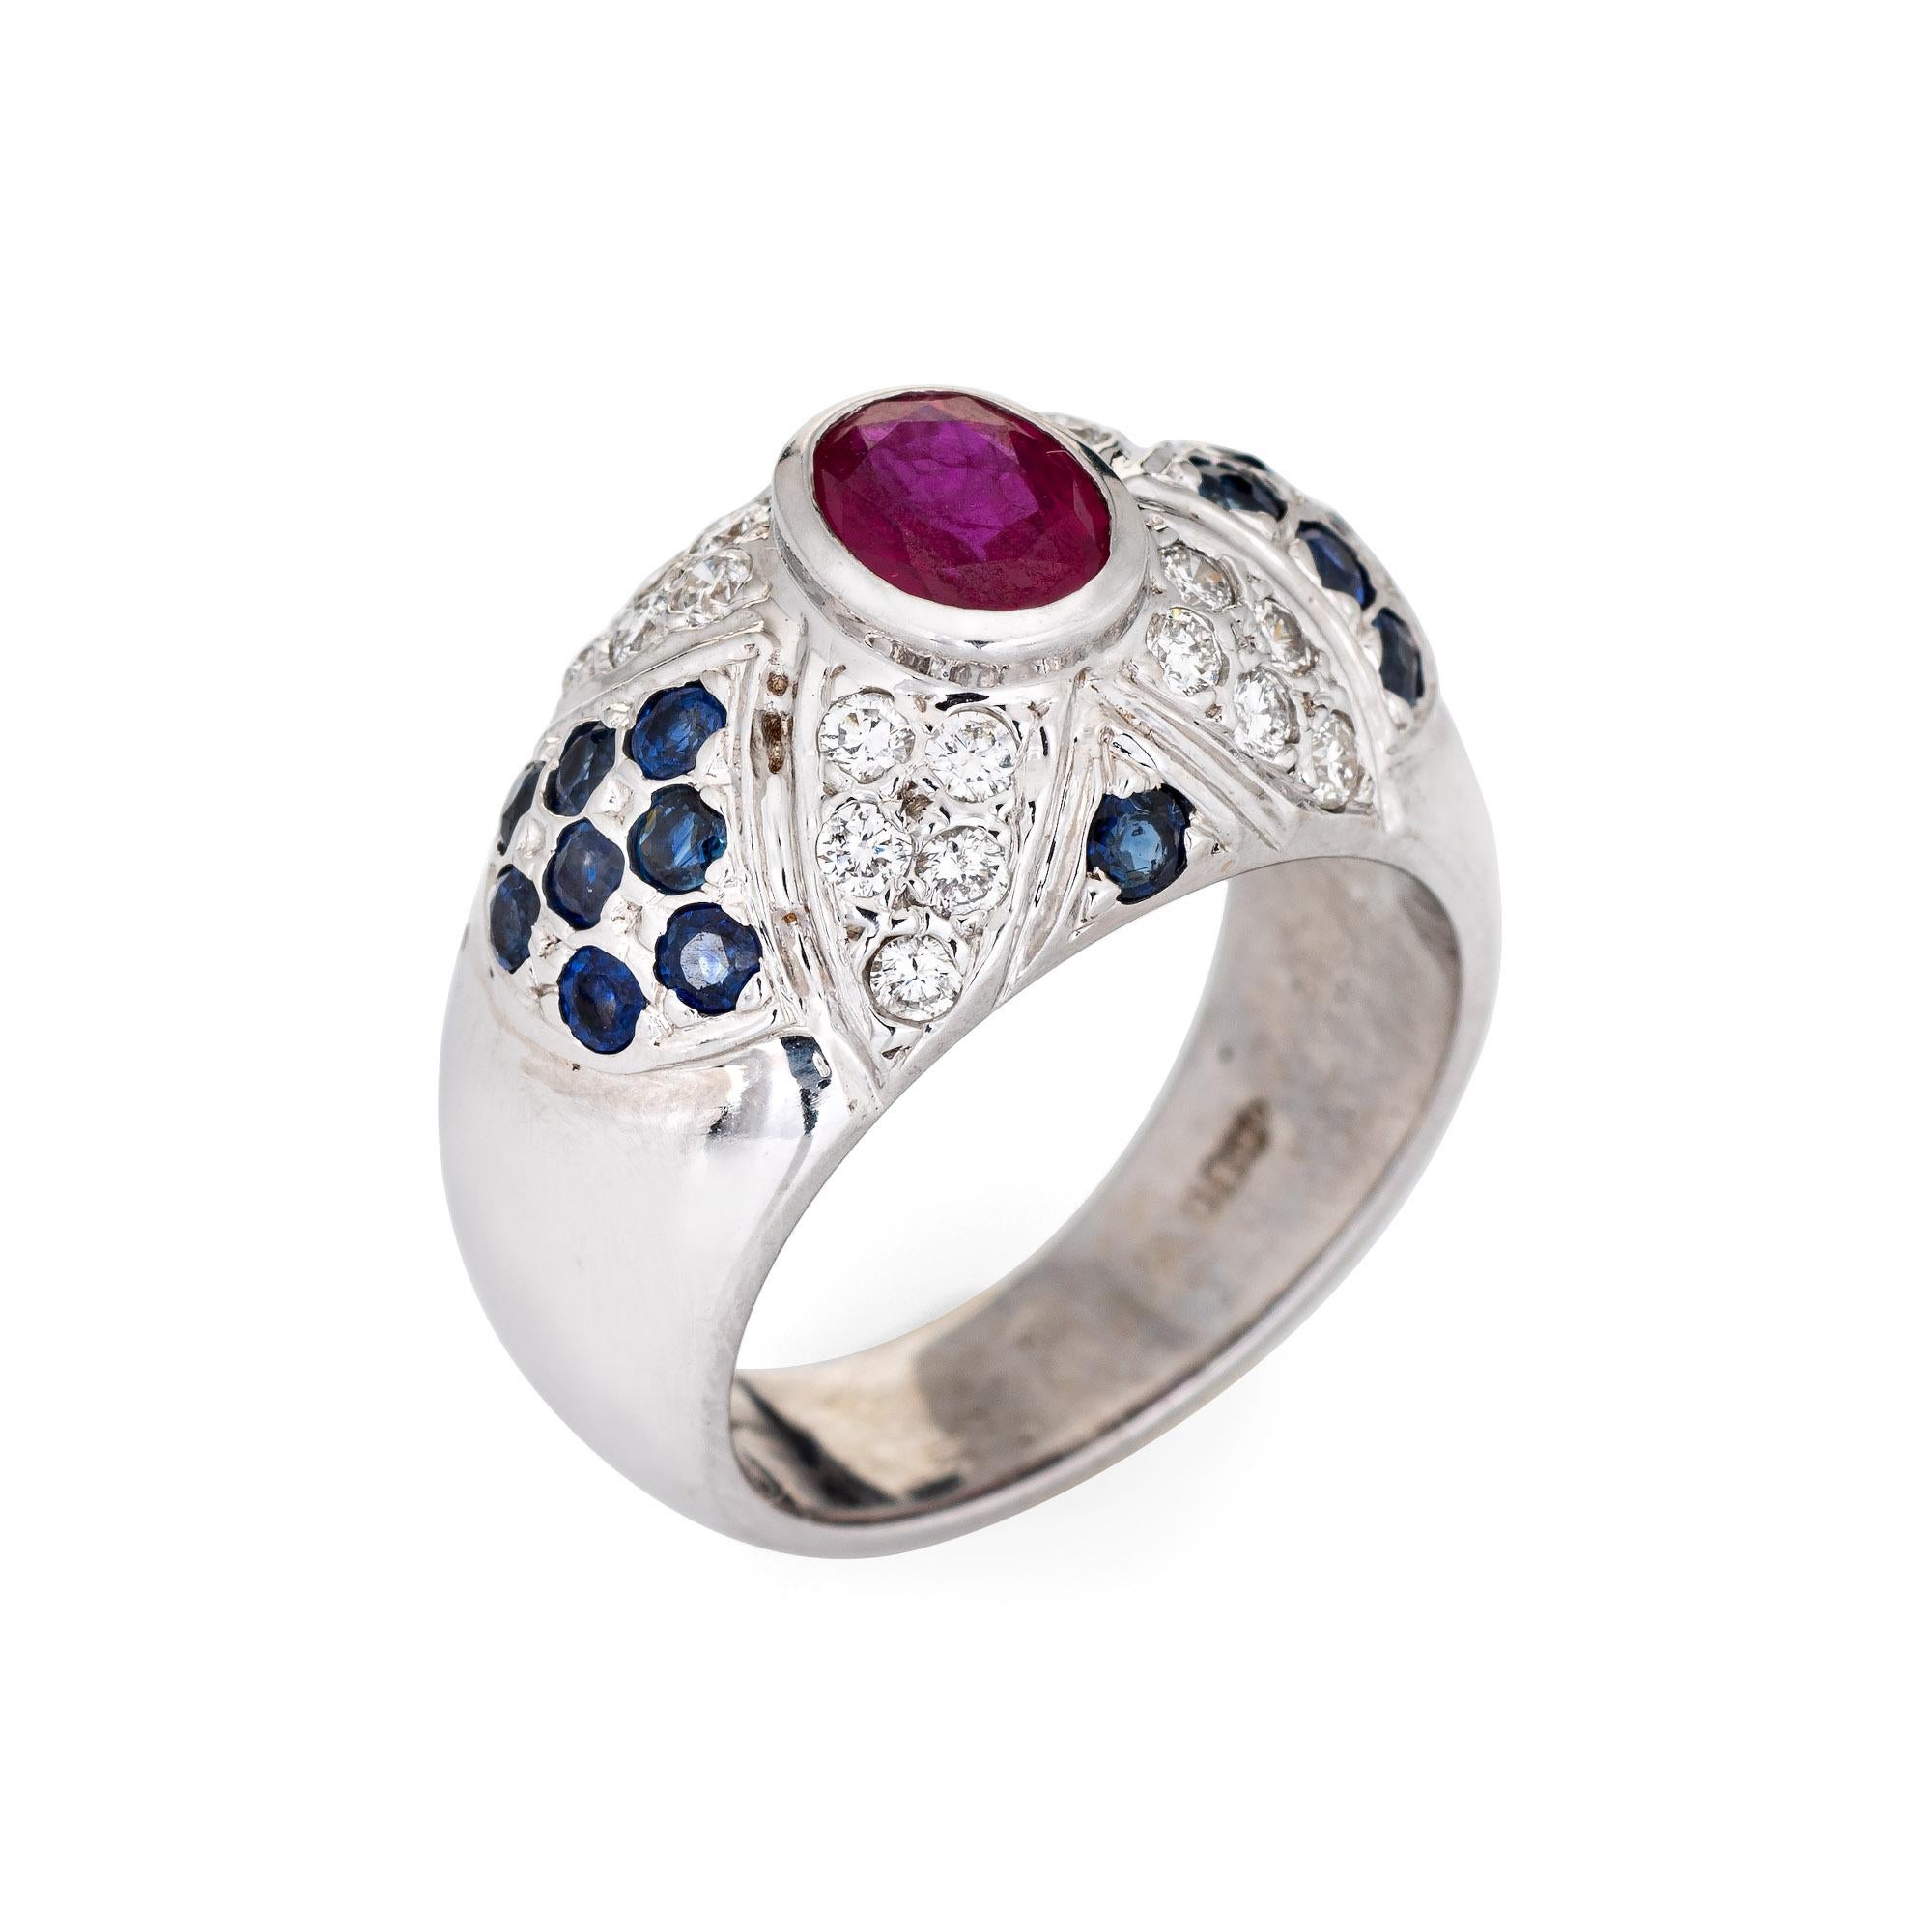 The wide band dome ring is set with a rich red ruby to the center, accented with sapphires and diamonds. The ring is great worn alone or stacked with your fine jewelry from any era. The low rise ring (6.5mm - 0.25 inches) sits comfortably on the